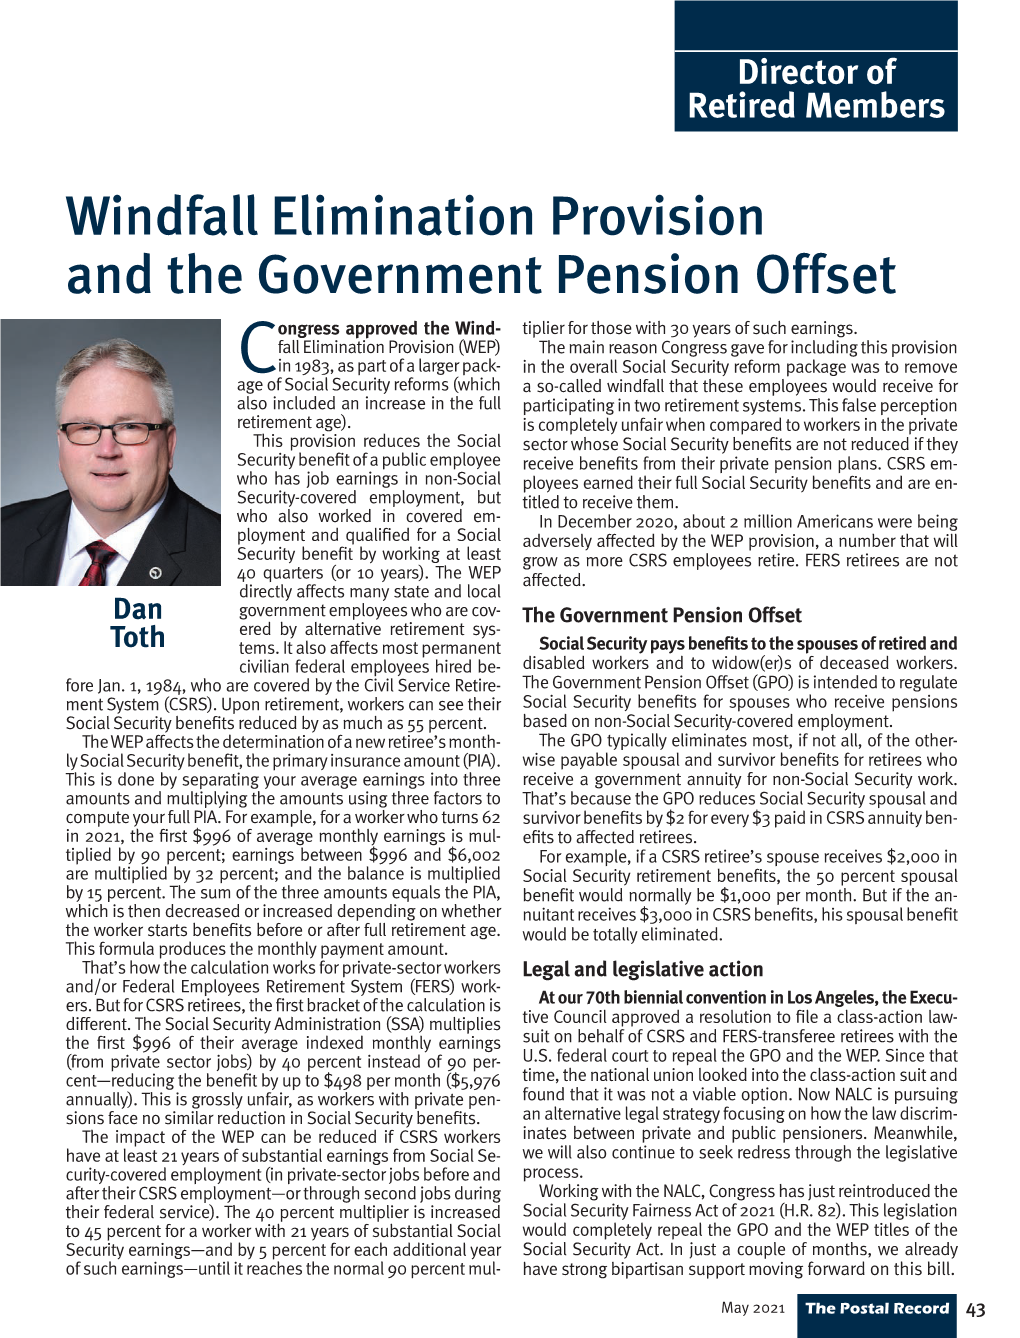 Windfall Elimination Provision and the Government Pension Offset Ongress Approved the Wind- Tiplier for Those with 30 Years of Such Earnings